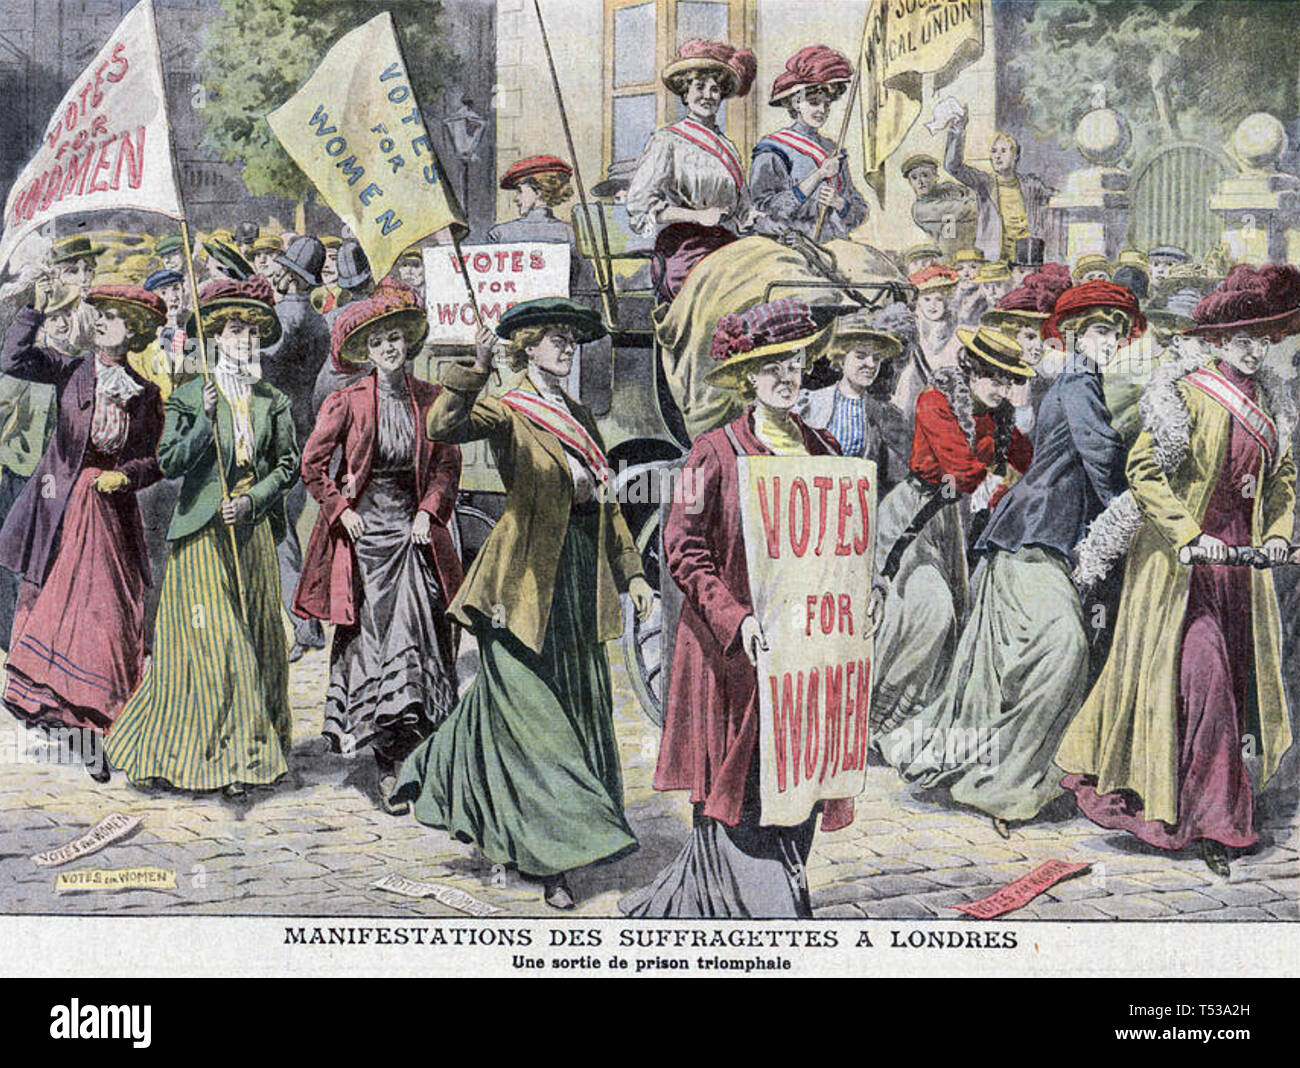 SUFFRAGETTE PARADE 22 August 1908. Newly released suffragettes Edith New and Mary Leigh are pulled in triumph on a cart from Holloway Prison to Queen's Hall, Langham Place,London. Illustration from a contemporary French magazine. Stock Photo